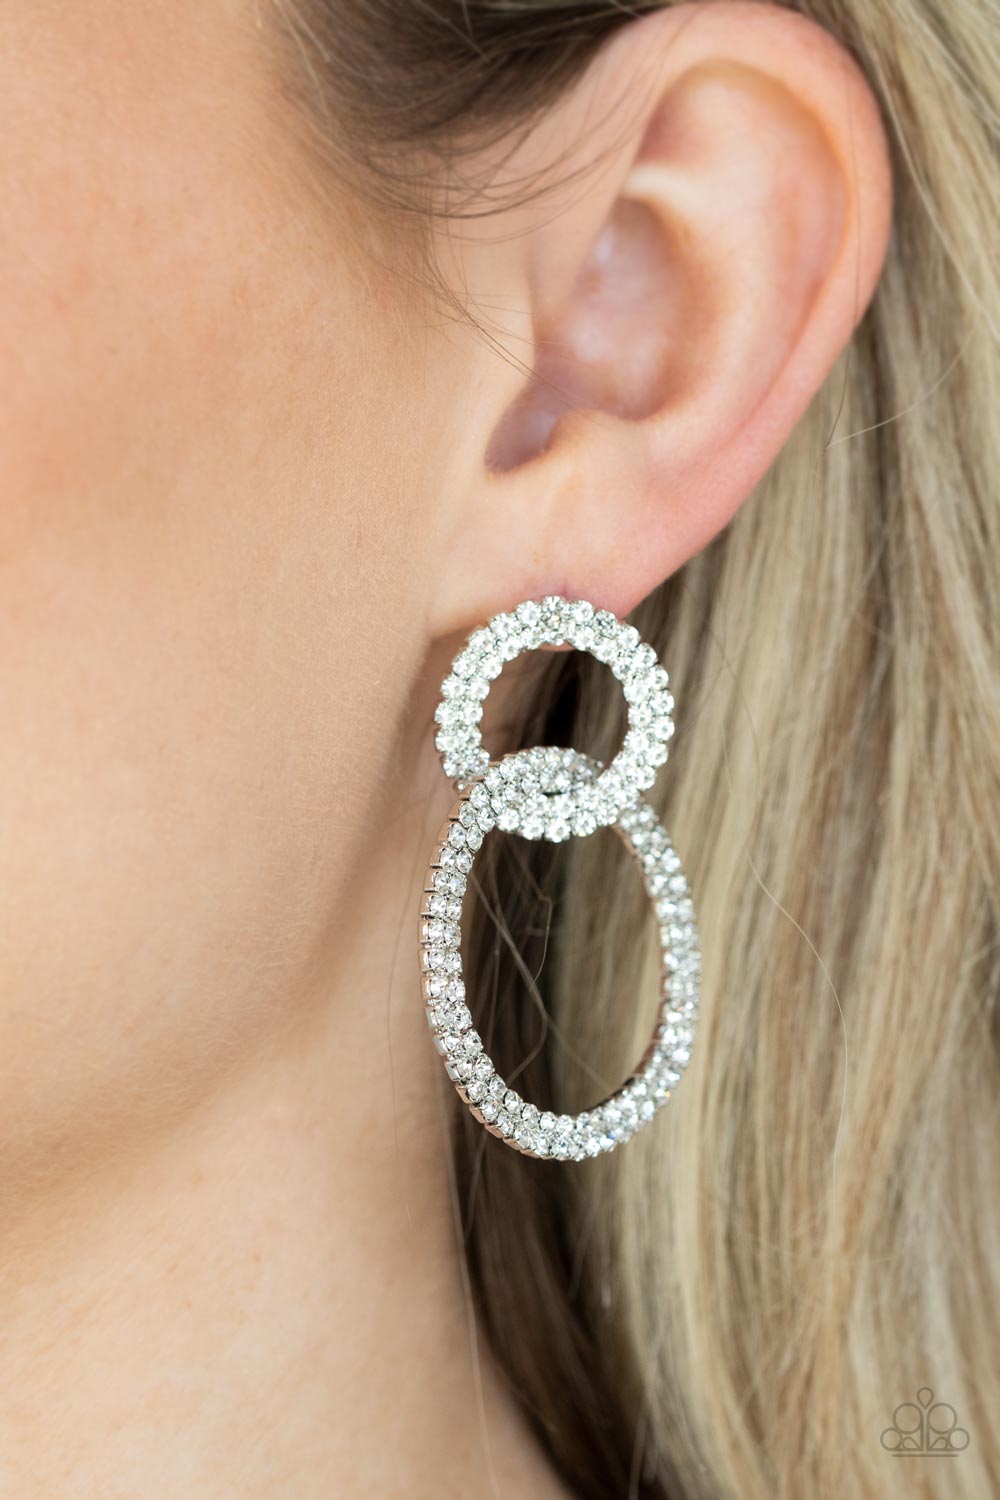 Intensely Icy - White Sparkly Earrings - Paparazzi Accessories - Rows of sparkly white rhinestones encircle into two interconnected hoops, creating a jaw-dropping unique earrings.  Bejeweled Accessories By Kristie - Trendy fashion jewelry for everyone -